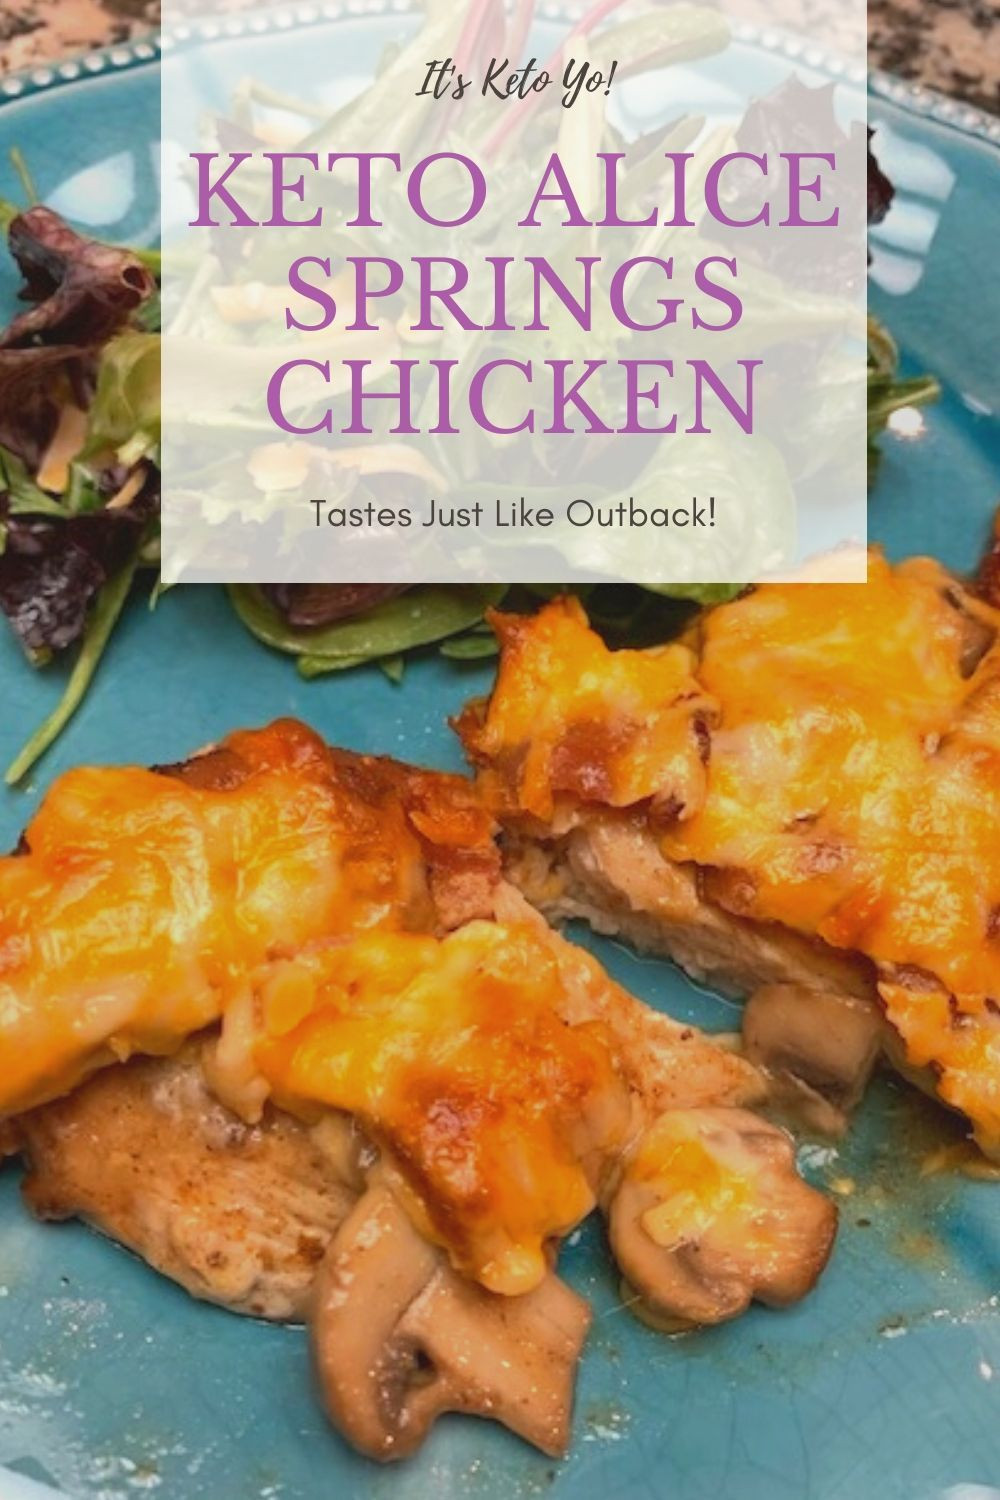 Alice Springs Chicken Keto
 Keto Alice Springs Chicken in 2020 With images